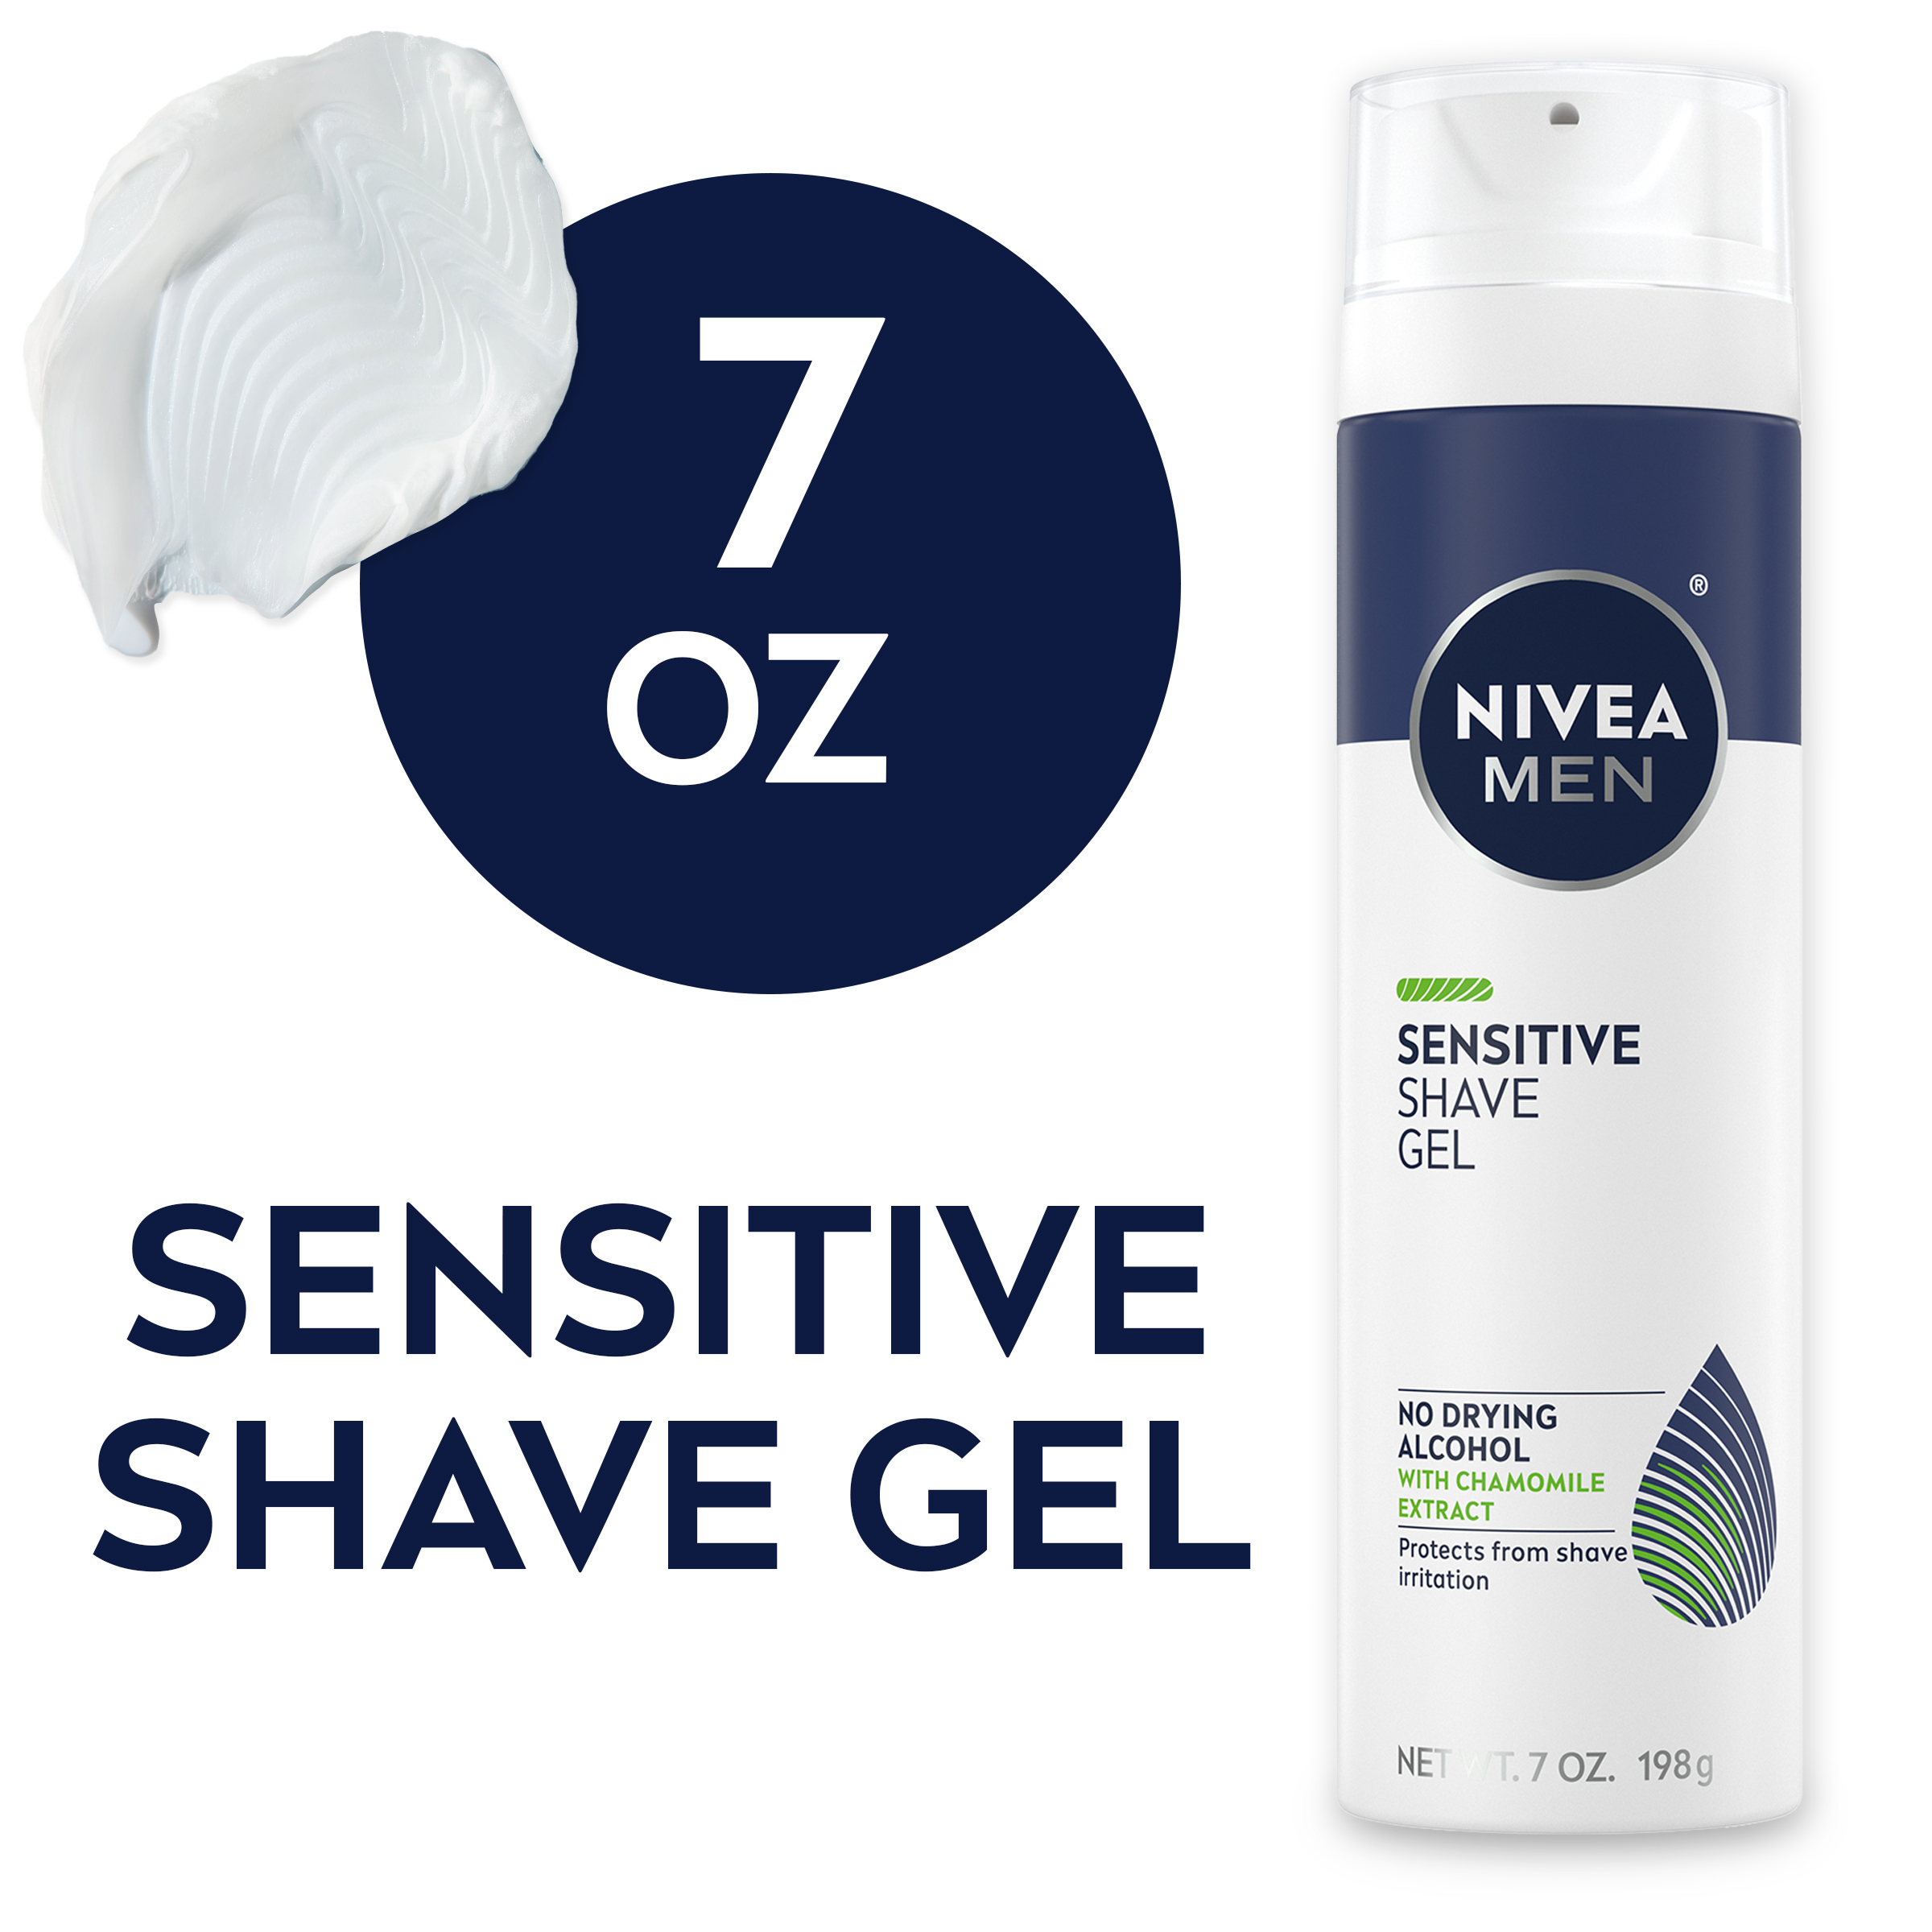 NIVEA MEN Sensitive Shave Gel with Vitamin E, Soothing Chamomile and Witch Hazel Extracts, 7 oz Can - image 1 of 13